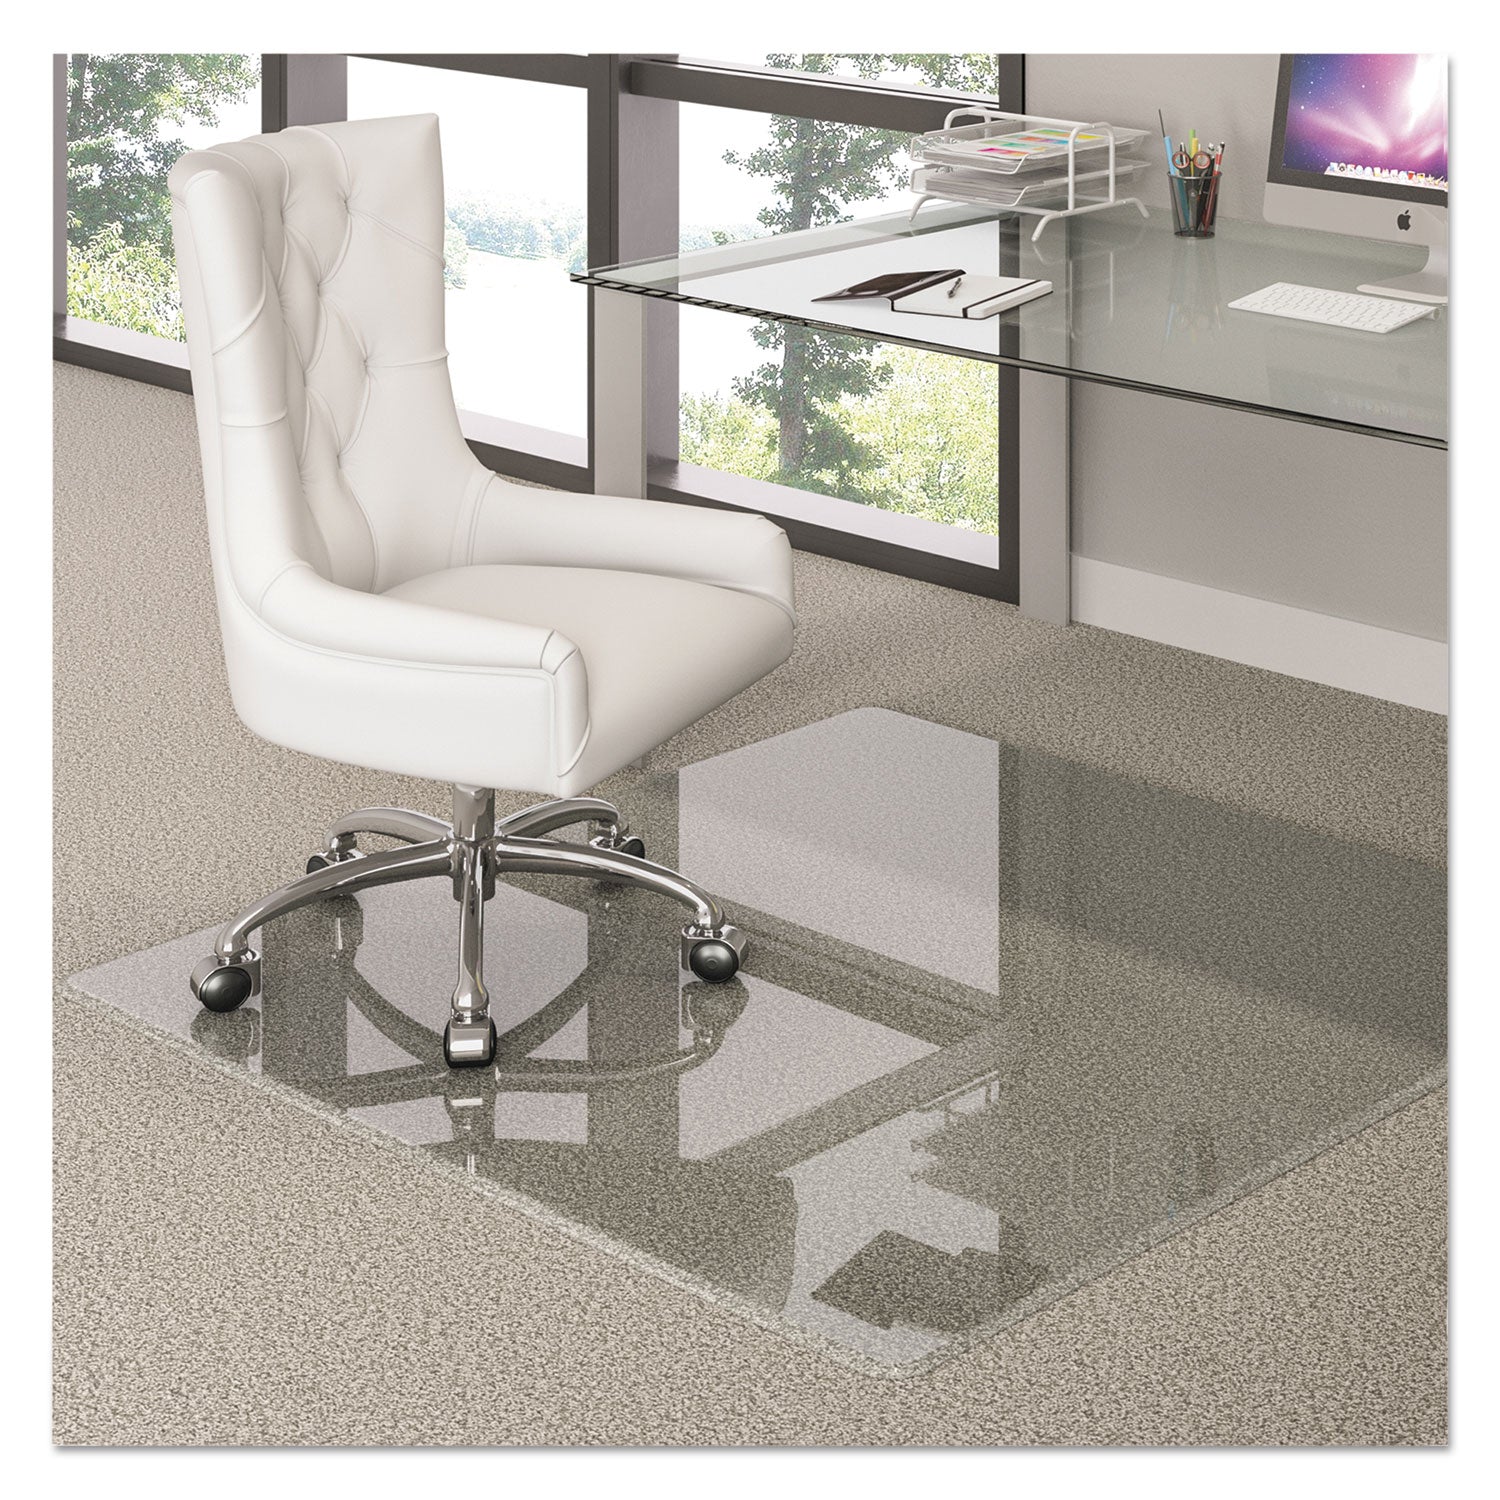 premium-glass-all-day-use-chair-mat--all-floor-types-44-x-50-rectangular-clear_defcmg70434450 - 1